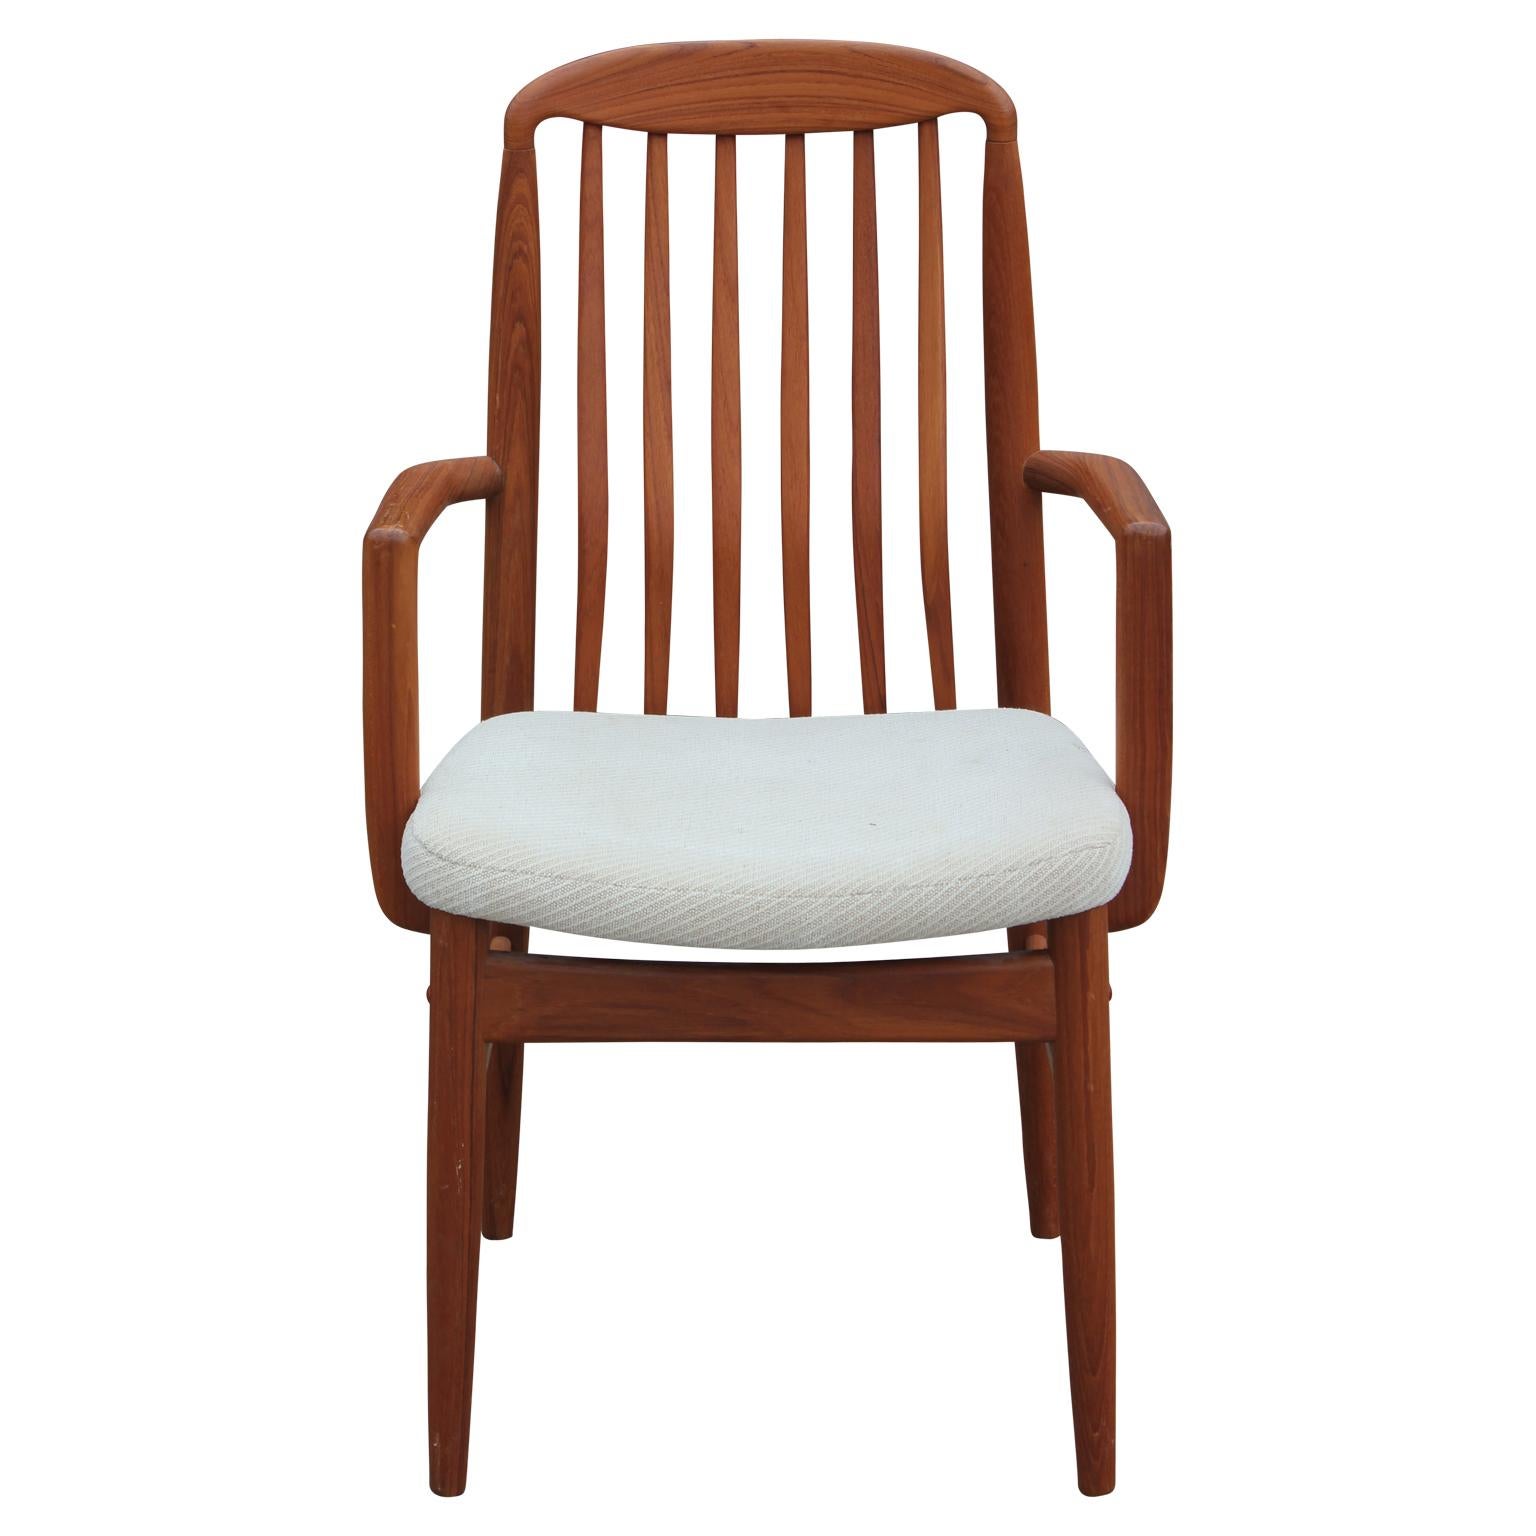 Lovely set of eight modern Danish solid teak dining chairs by Benny Linden. This set features two armchairs and six without arms. 

Dimensions of chairs with arms: 21.5 W x 37 in. H x 19.5 in. D x 18 in. SH.